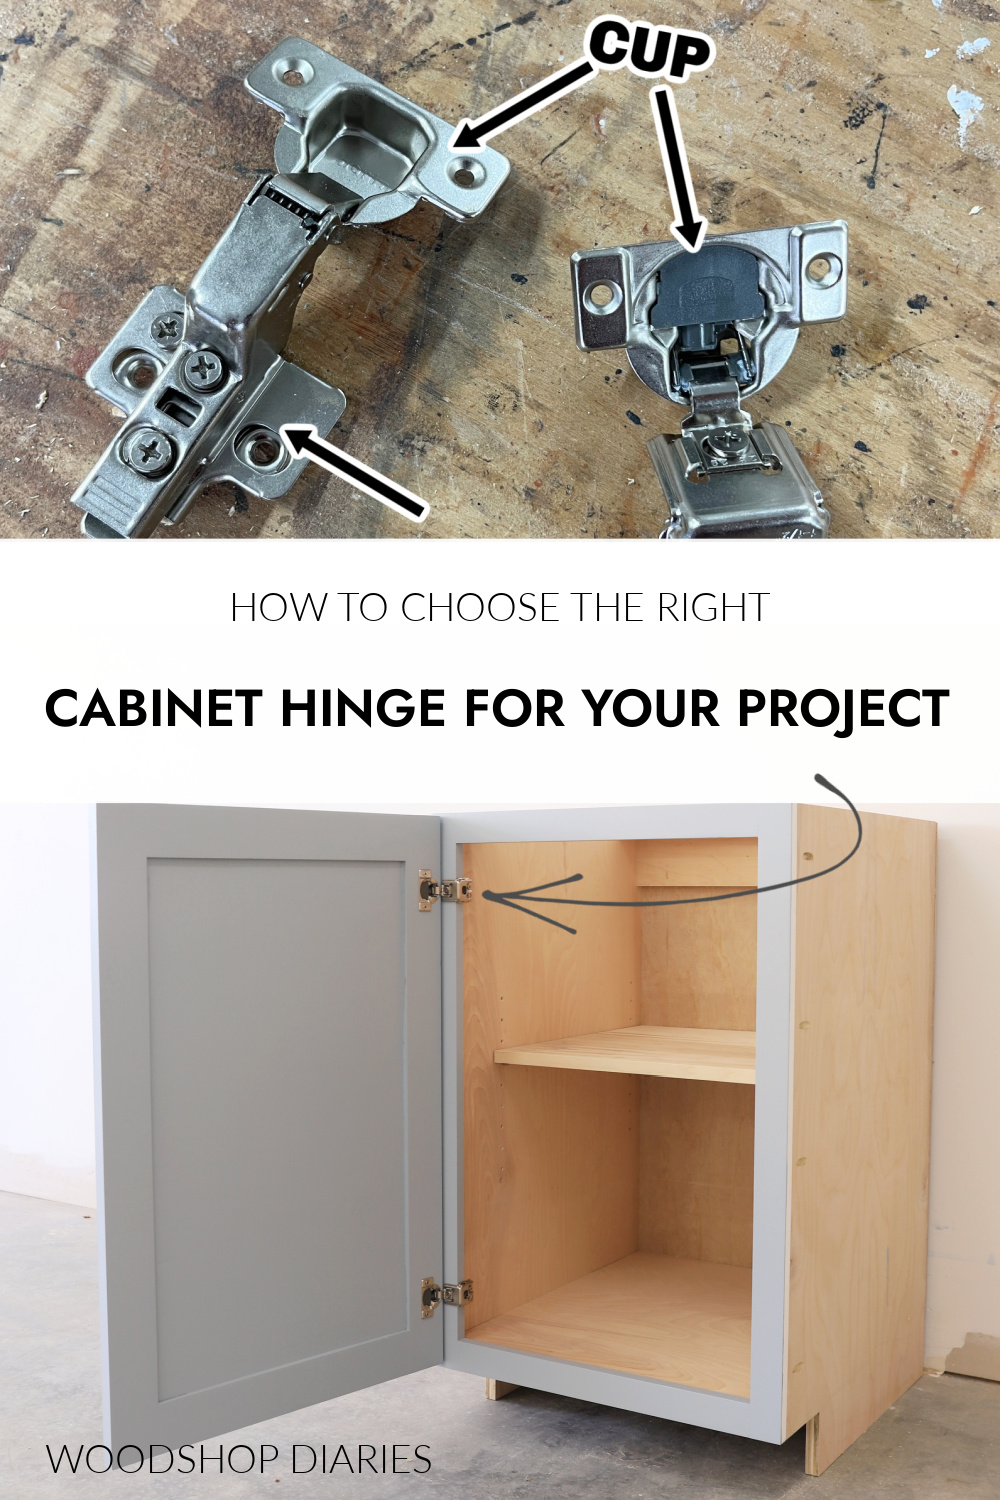 Pinterest collage image showing two concealed hinges at top and cabinet with door open at bottom with text "how to choose the right cabinet hinge for your project"